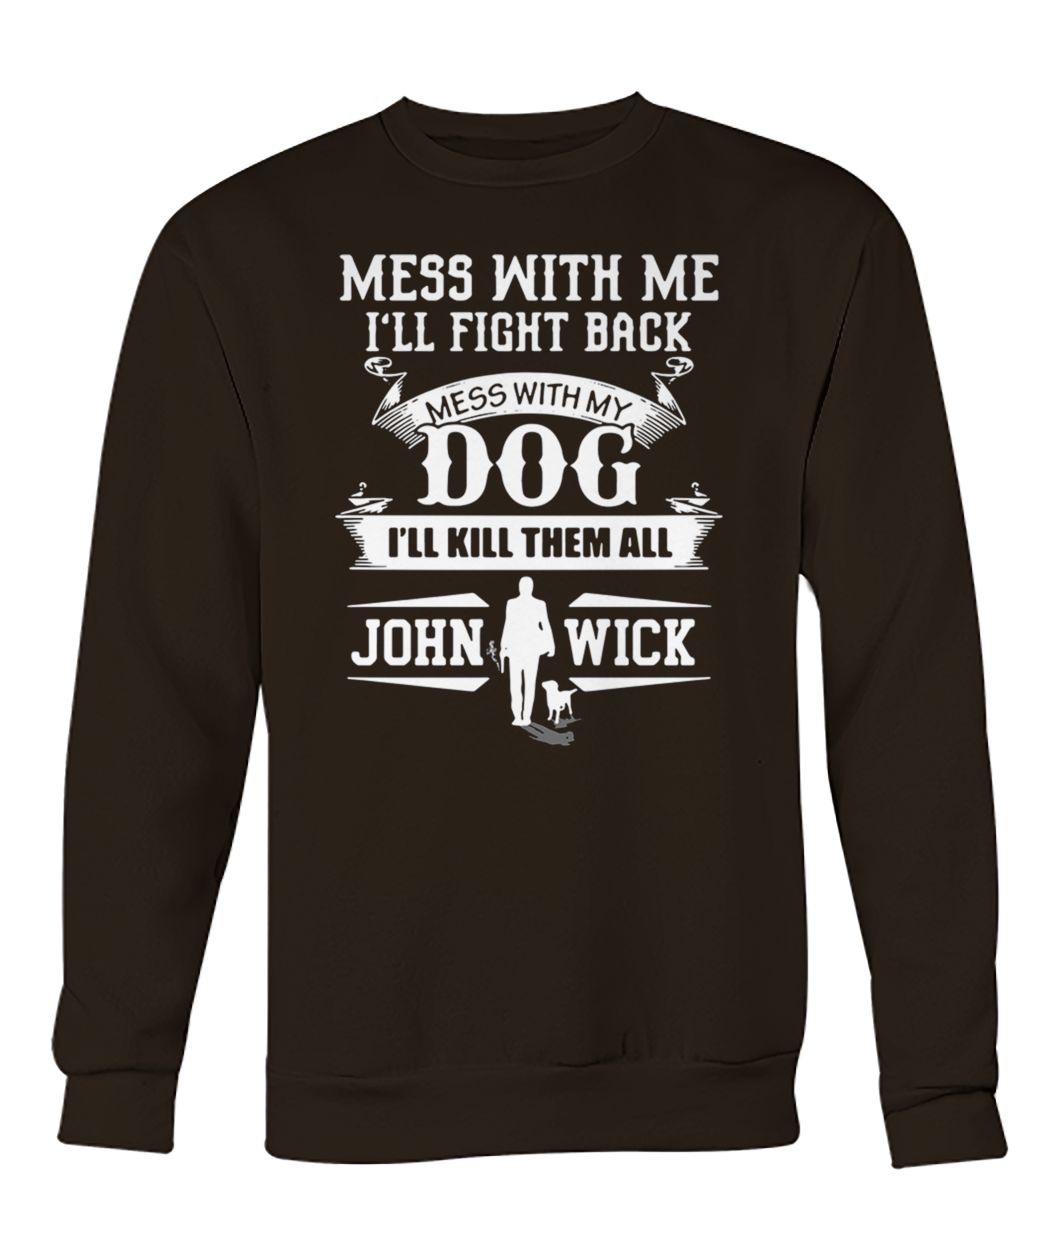 Mess with me I'll fight back mess with my dog I'll kill them all john wick crew neck sweatshirt